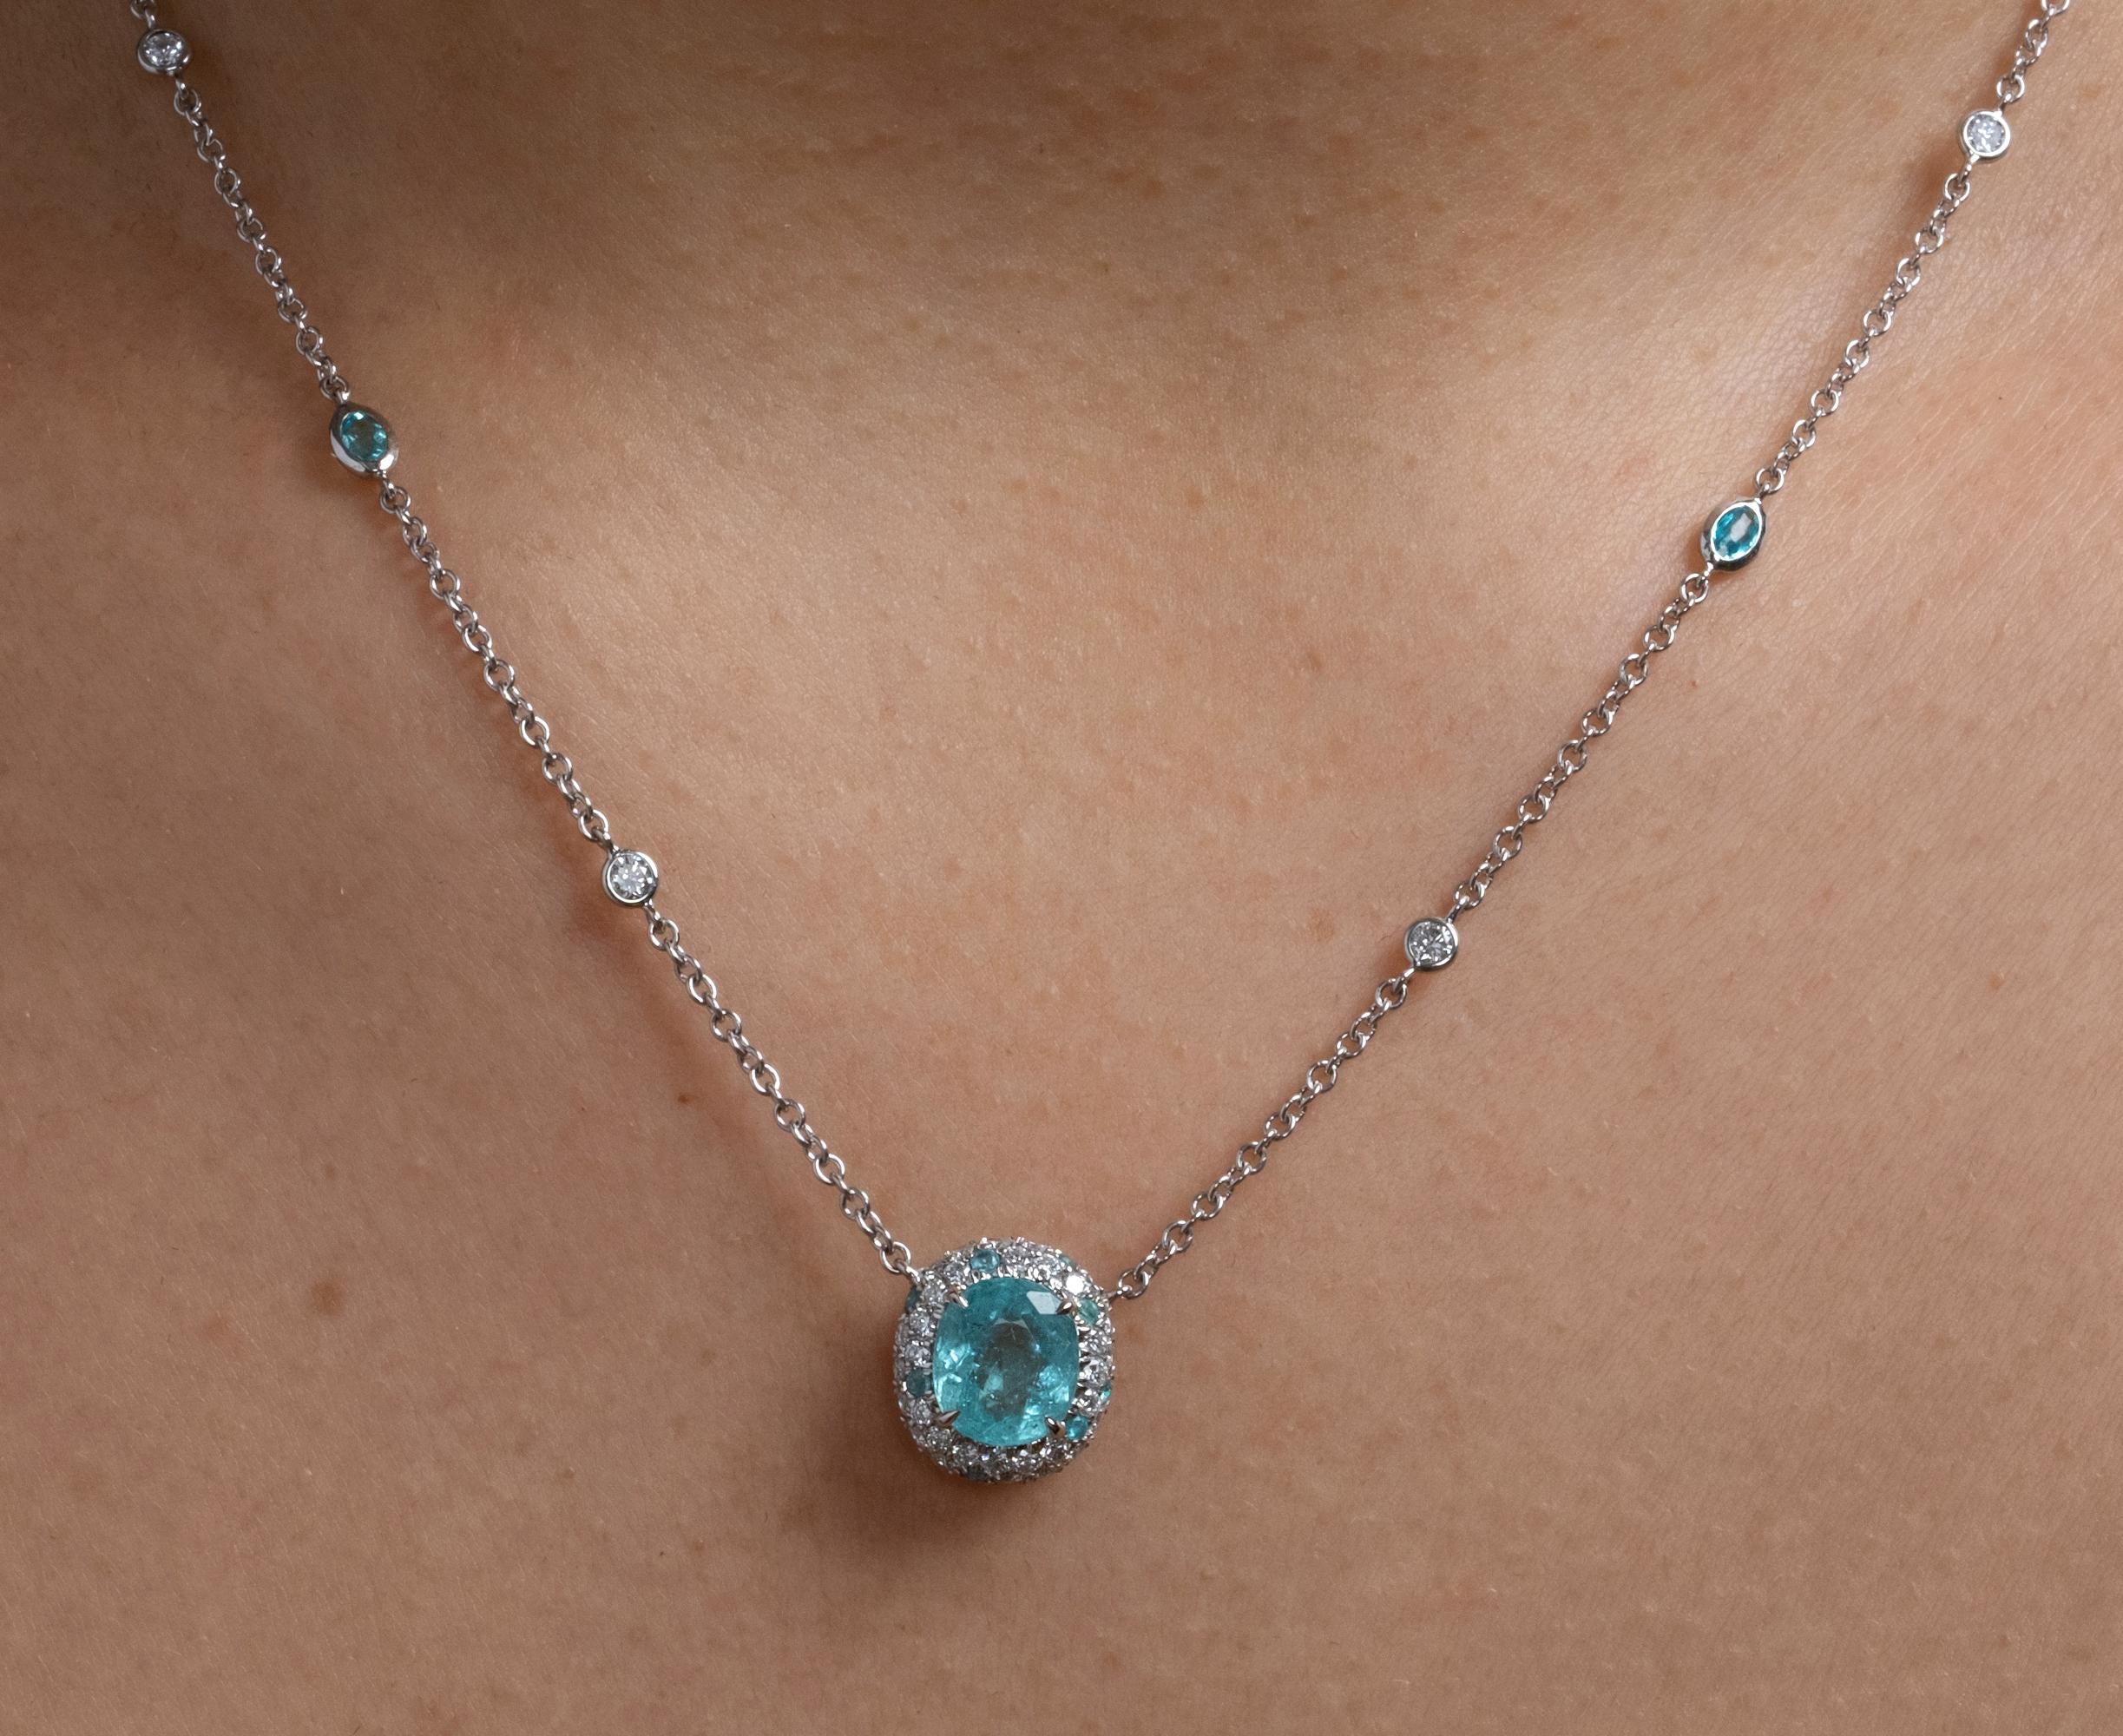 Highly collectable 3.61ctw Natural Paraiba Tourmaline and Diamond Platinum Necklace, GIA CERTIFIED.

A high-fashion piece of jewelry from another planet! This jewel will make a great addition to any GEM/jewelry collection. An extremely rear find -